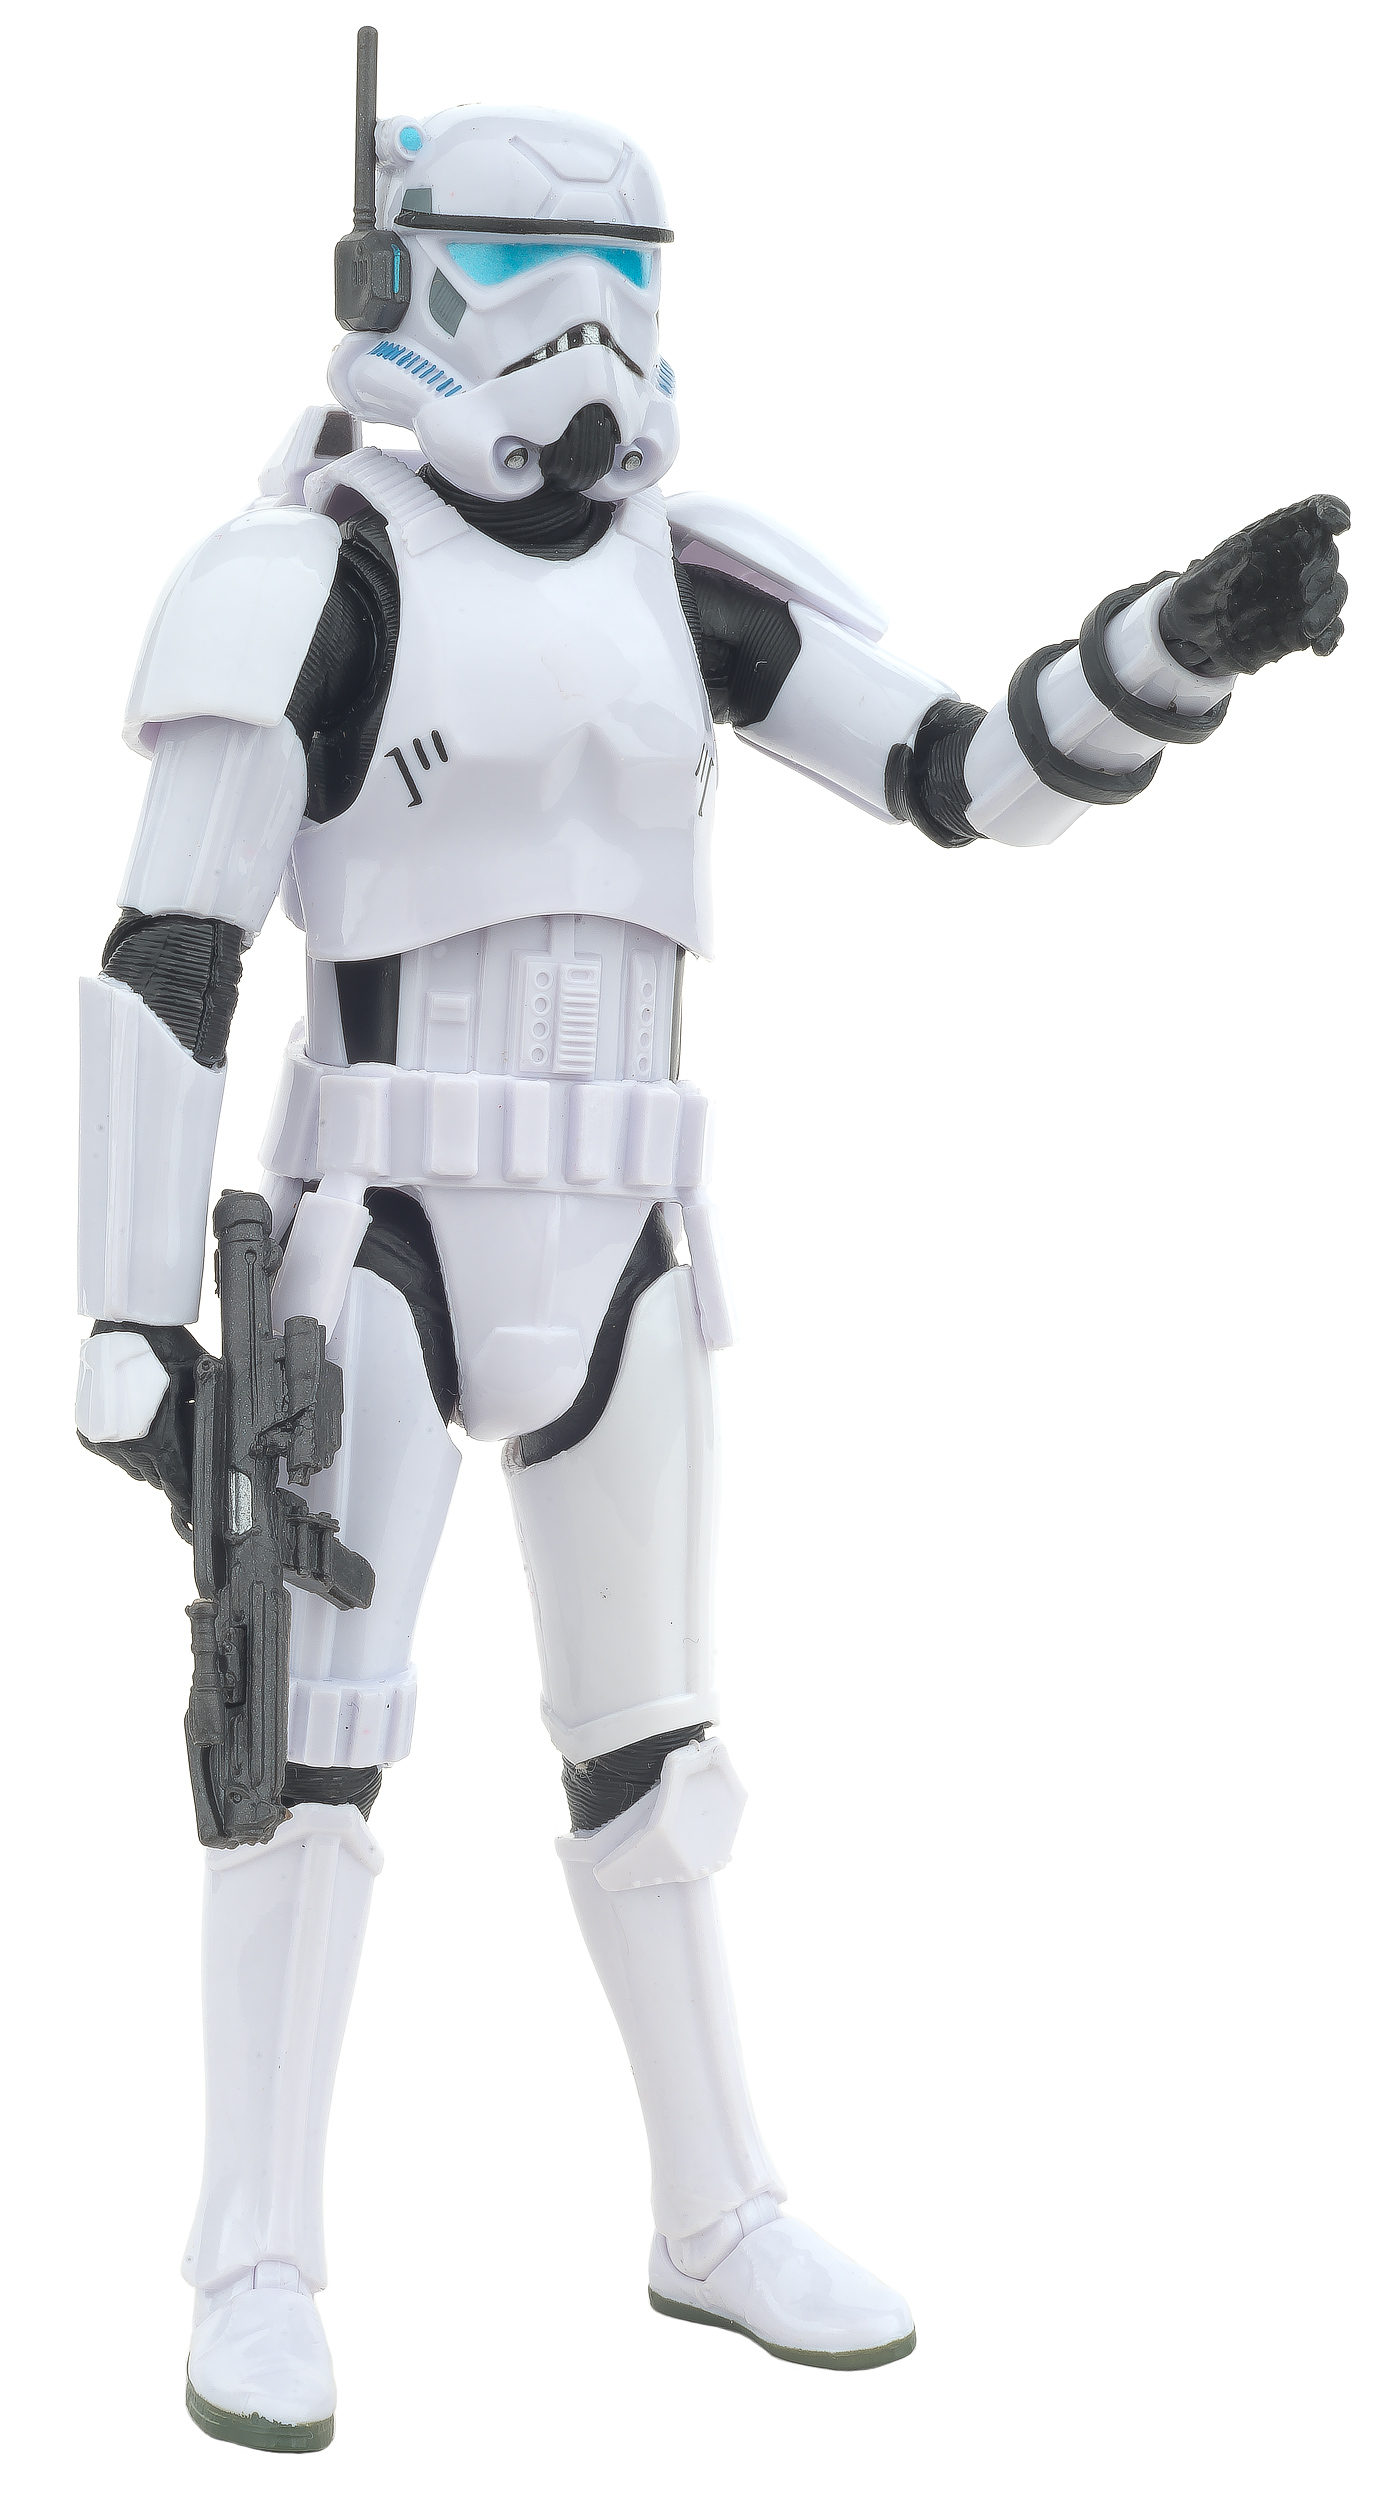 The Black Series 6-Inch - Fan Channel Exclusive - Expanded Universe - Comic Set - SCAR Trooper Mic